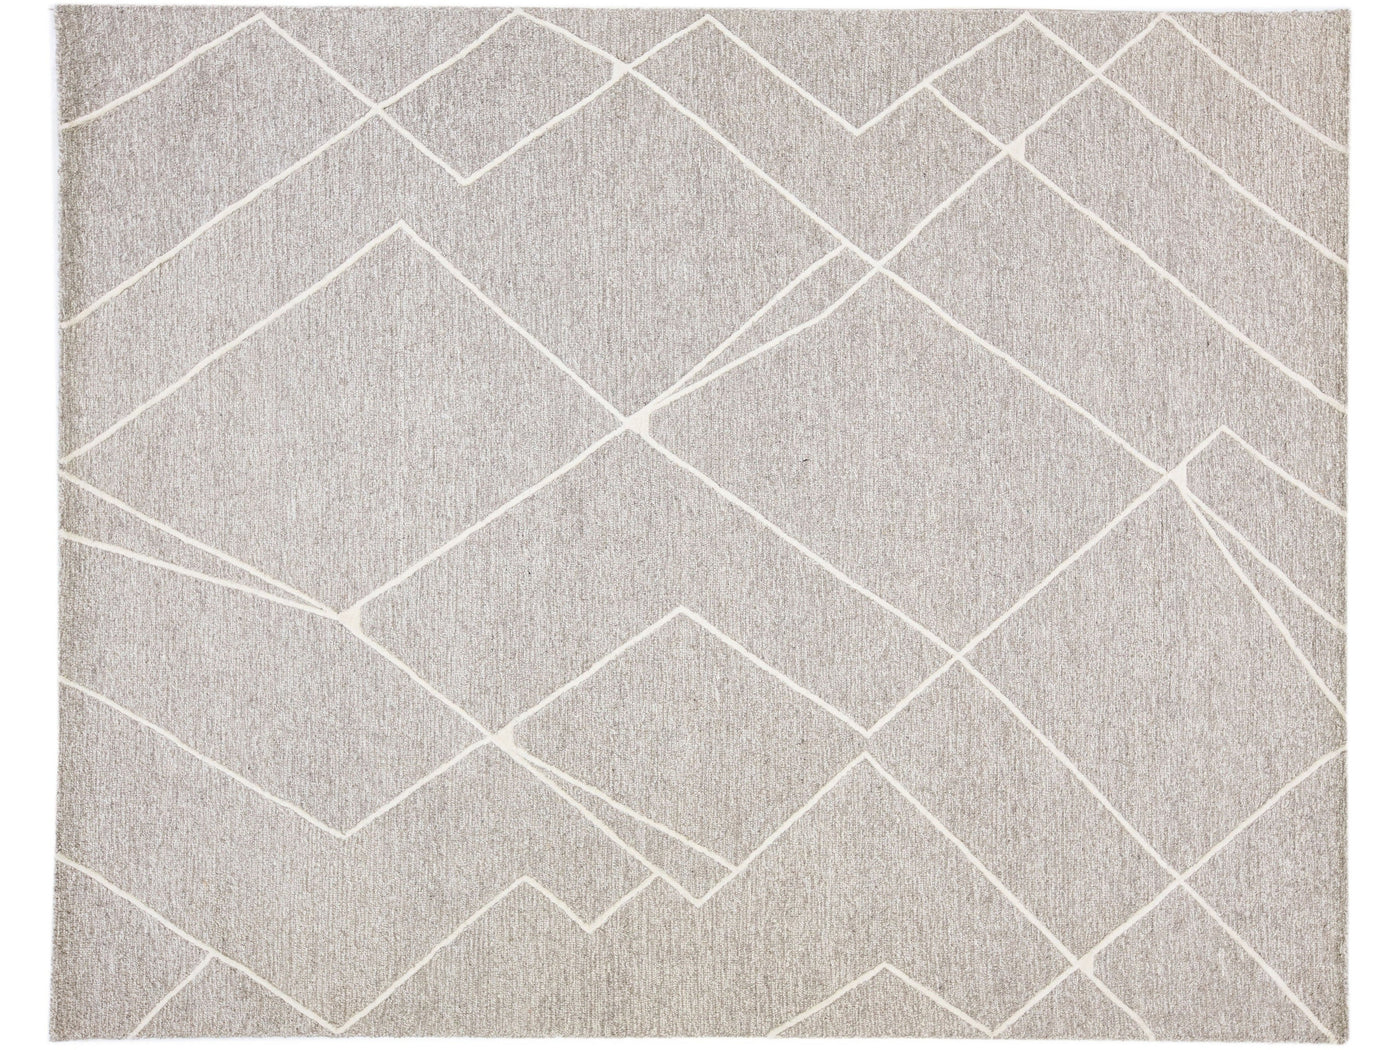 Contemporary Texture Gray & Ivory Hand-Tufted Geometric Wool Rug